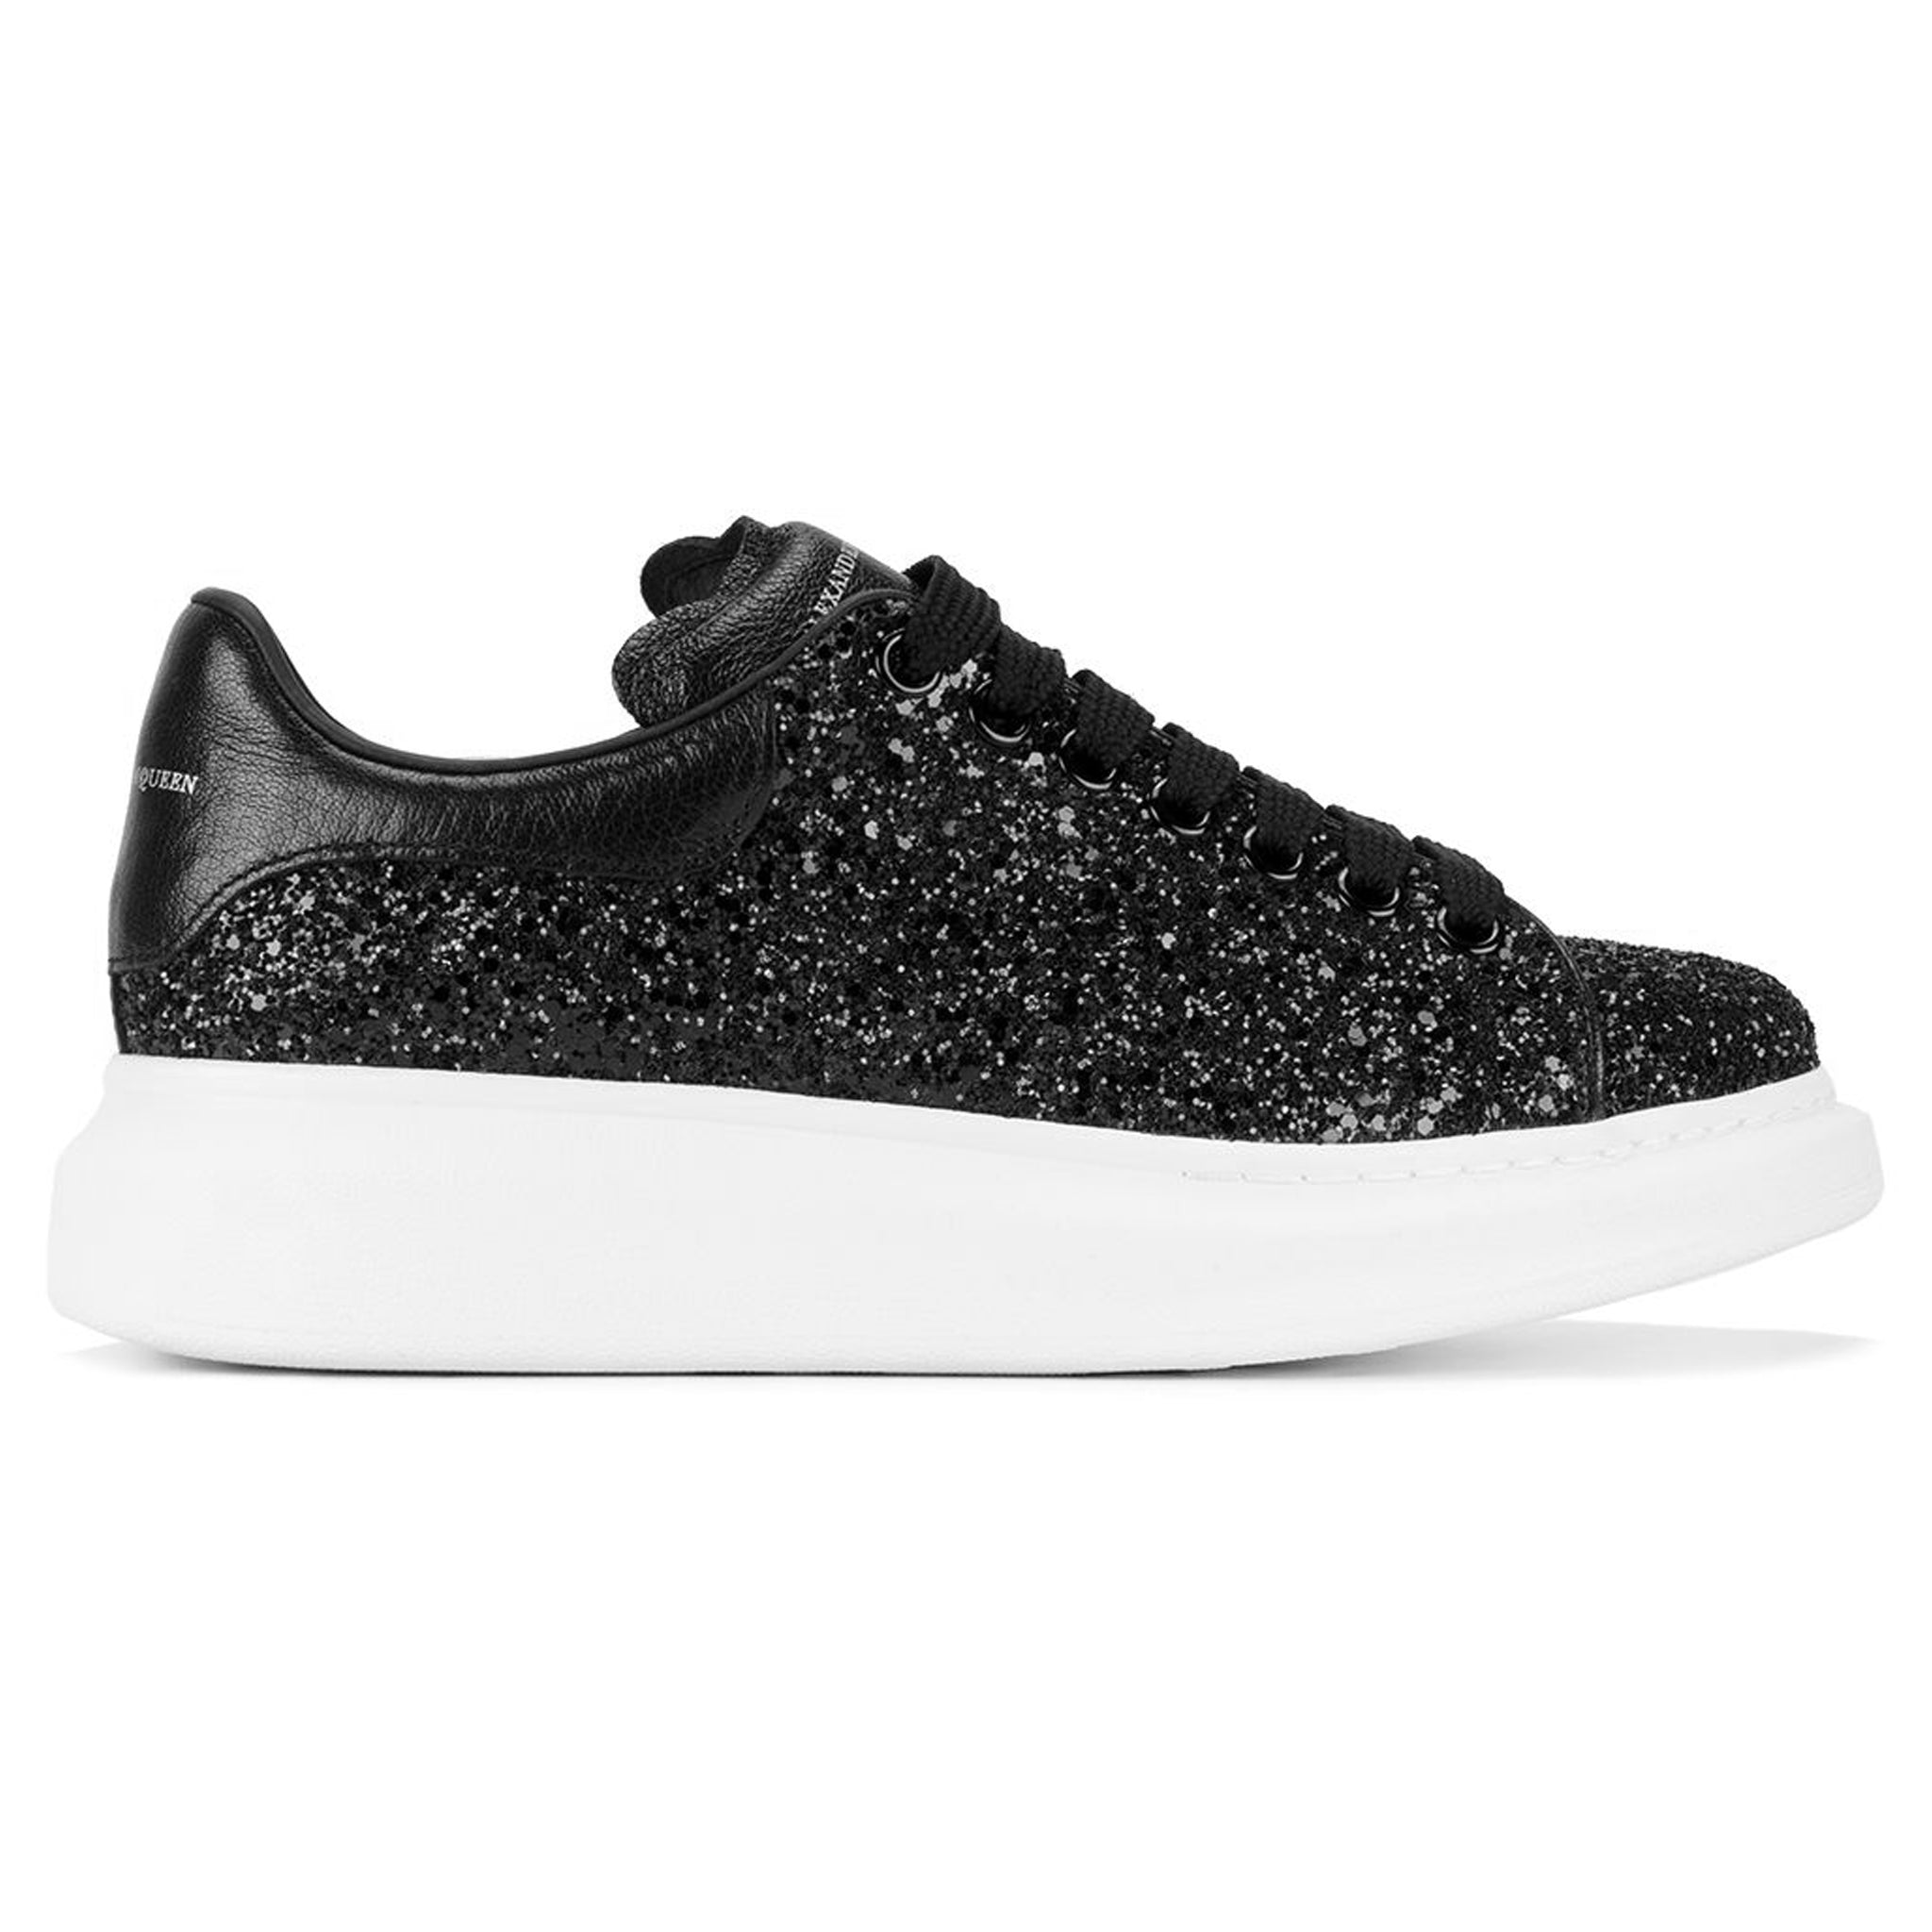 Side view of Alexander Mcqueen Raised Sole Black Glitter Trainers